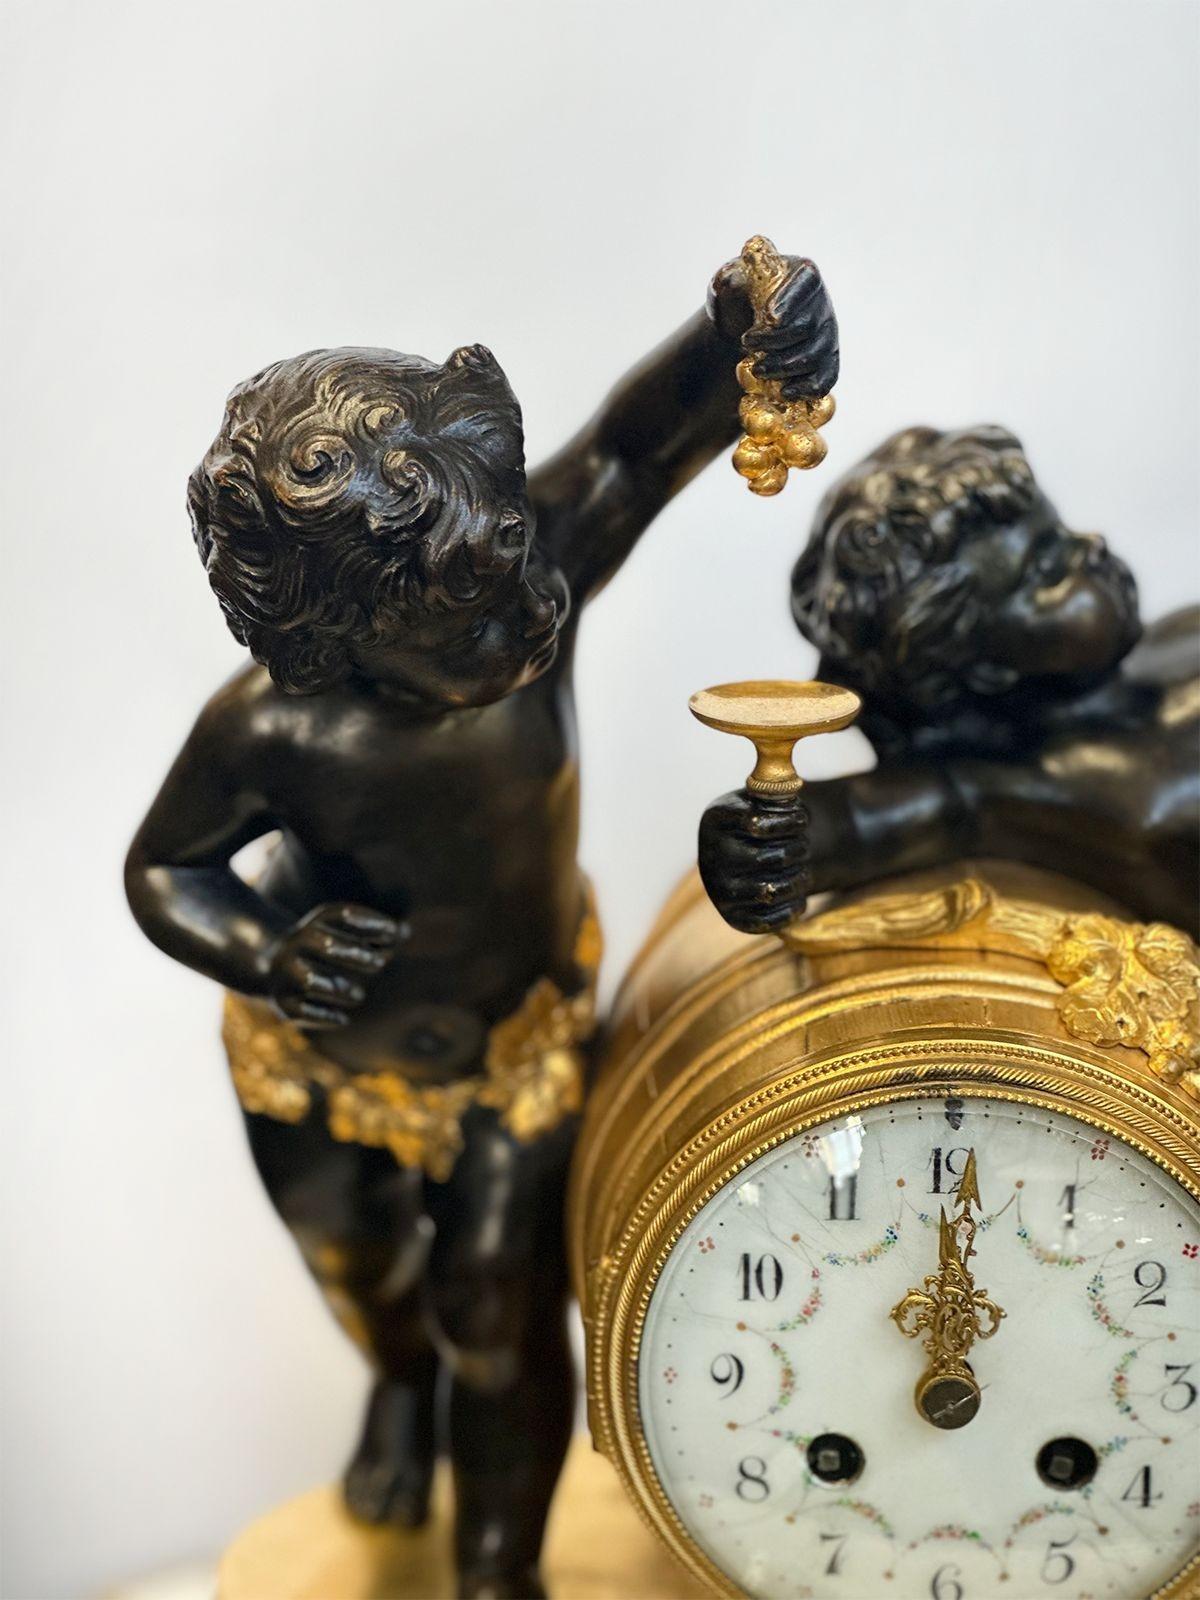 Beautiful bronze mantel clock with rich bronze in ormolu and supported by a marble base; made in France in the early 20th century. The clock features two putti, one of them holding grapes and the other a little dish.
Dimensions:
15